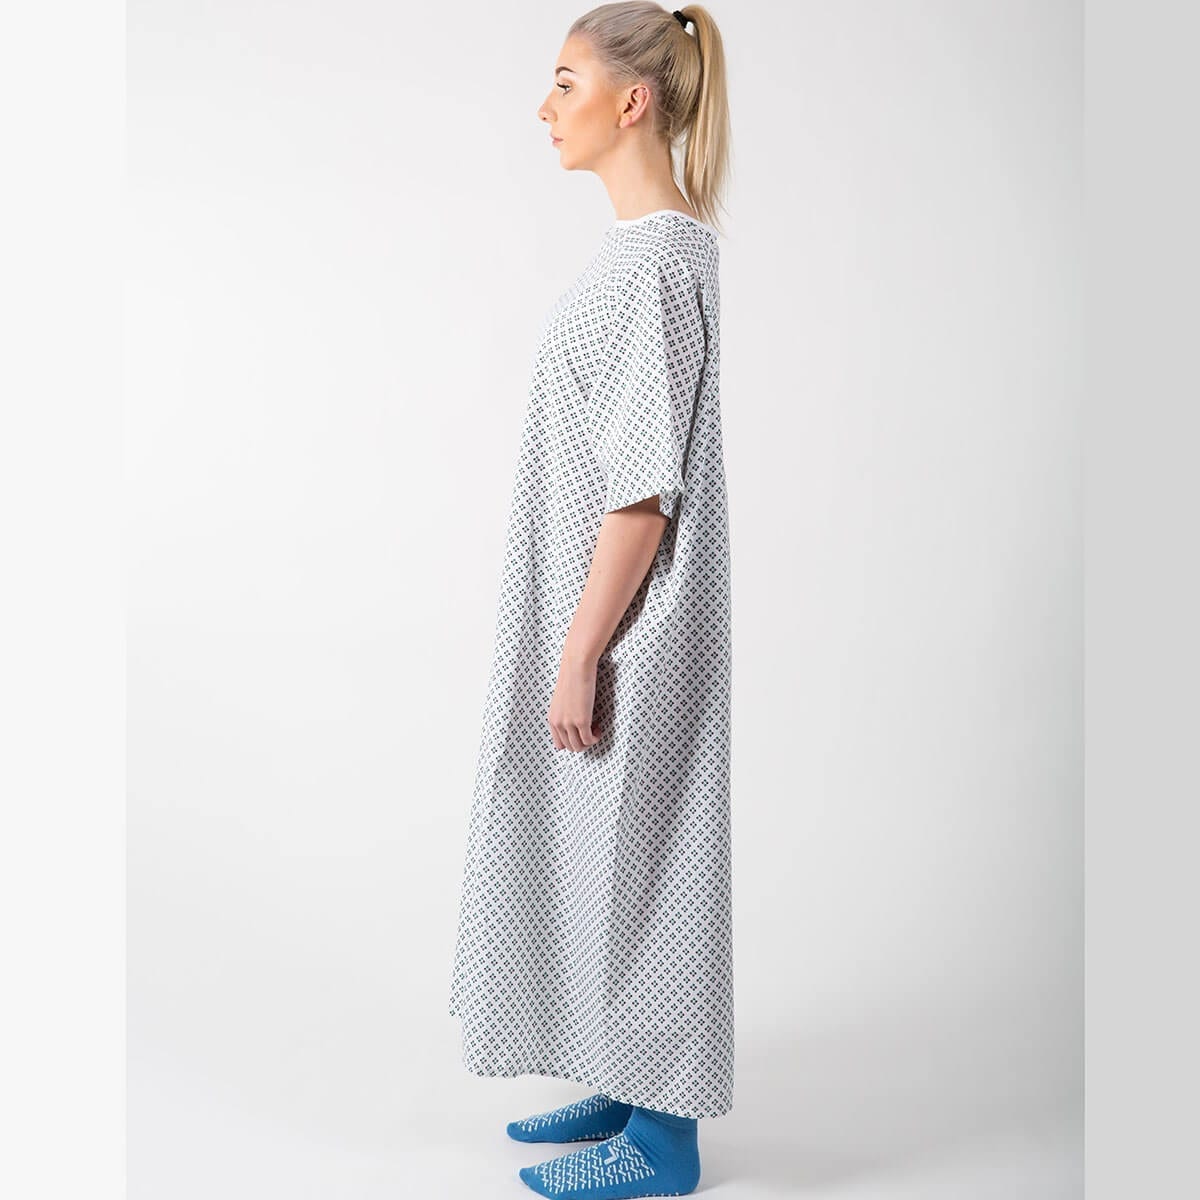 Hospital pullover gown - side view